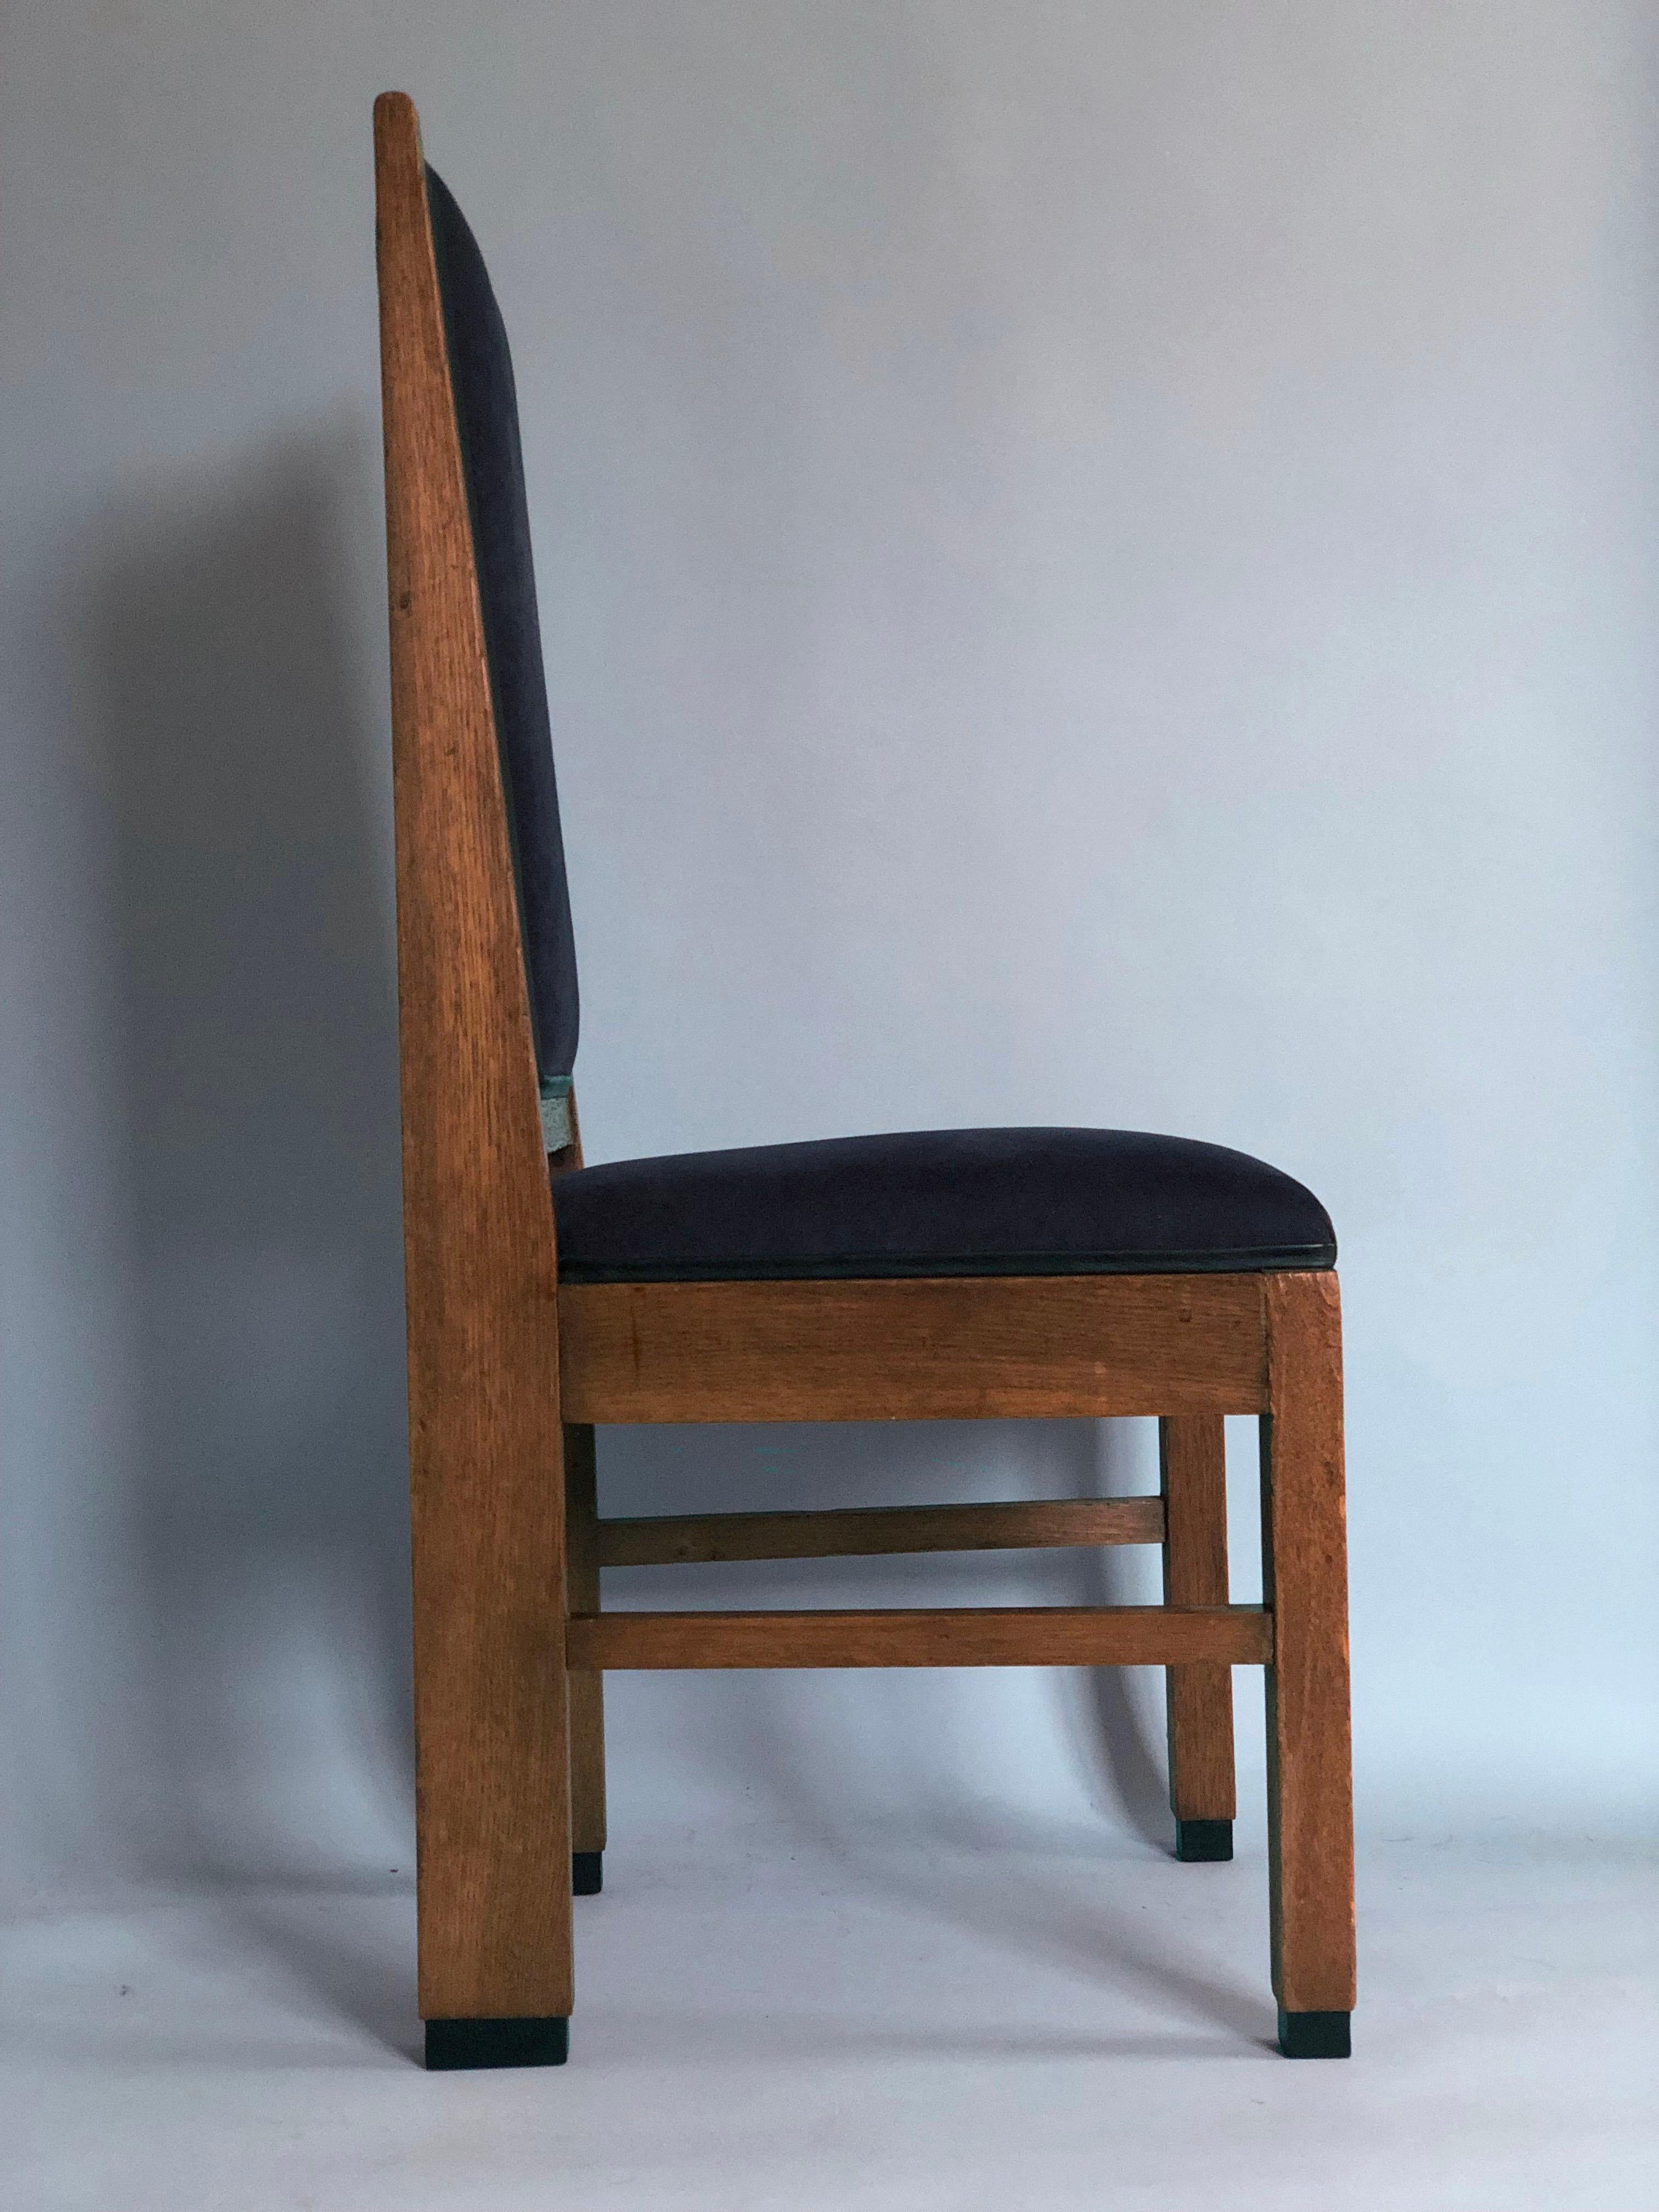 Dutch Art Deco Haagse School Dining Chair Frits Spanjaard 1930s Set of 2 For Sale